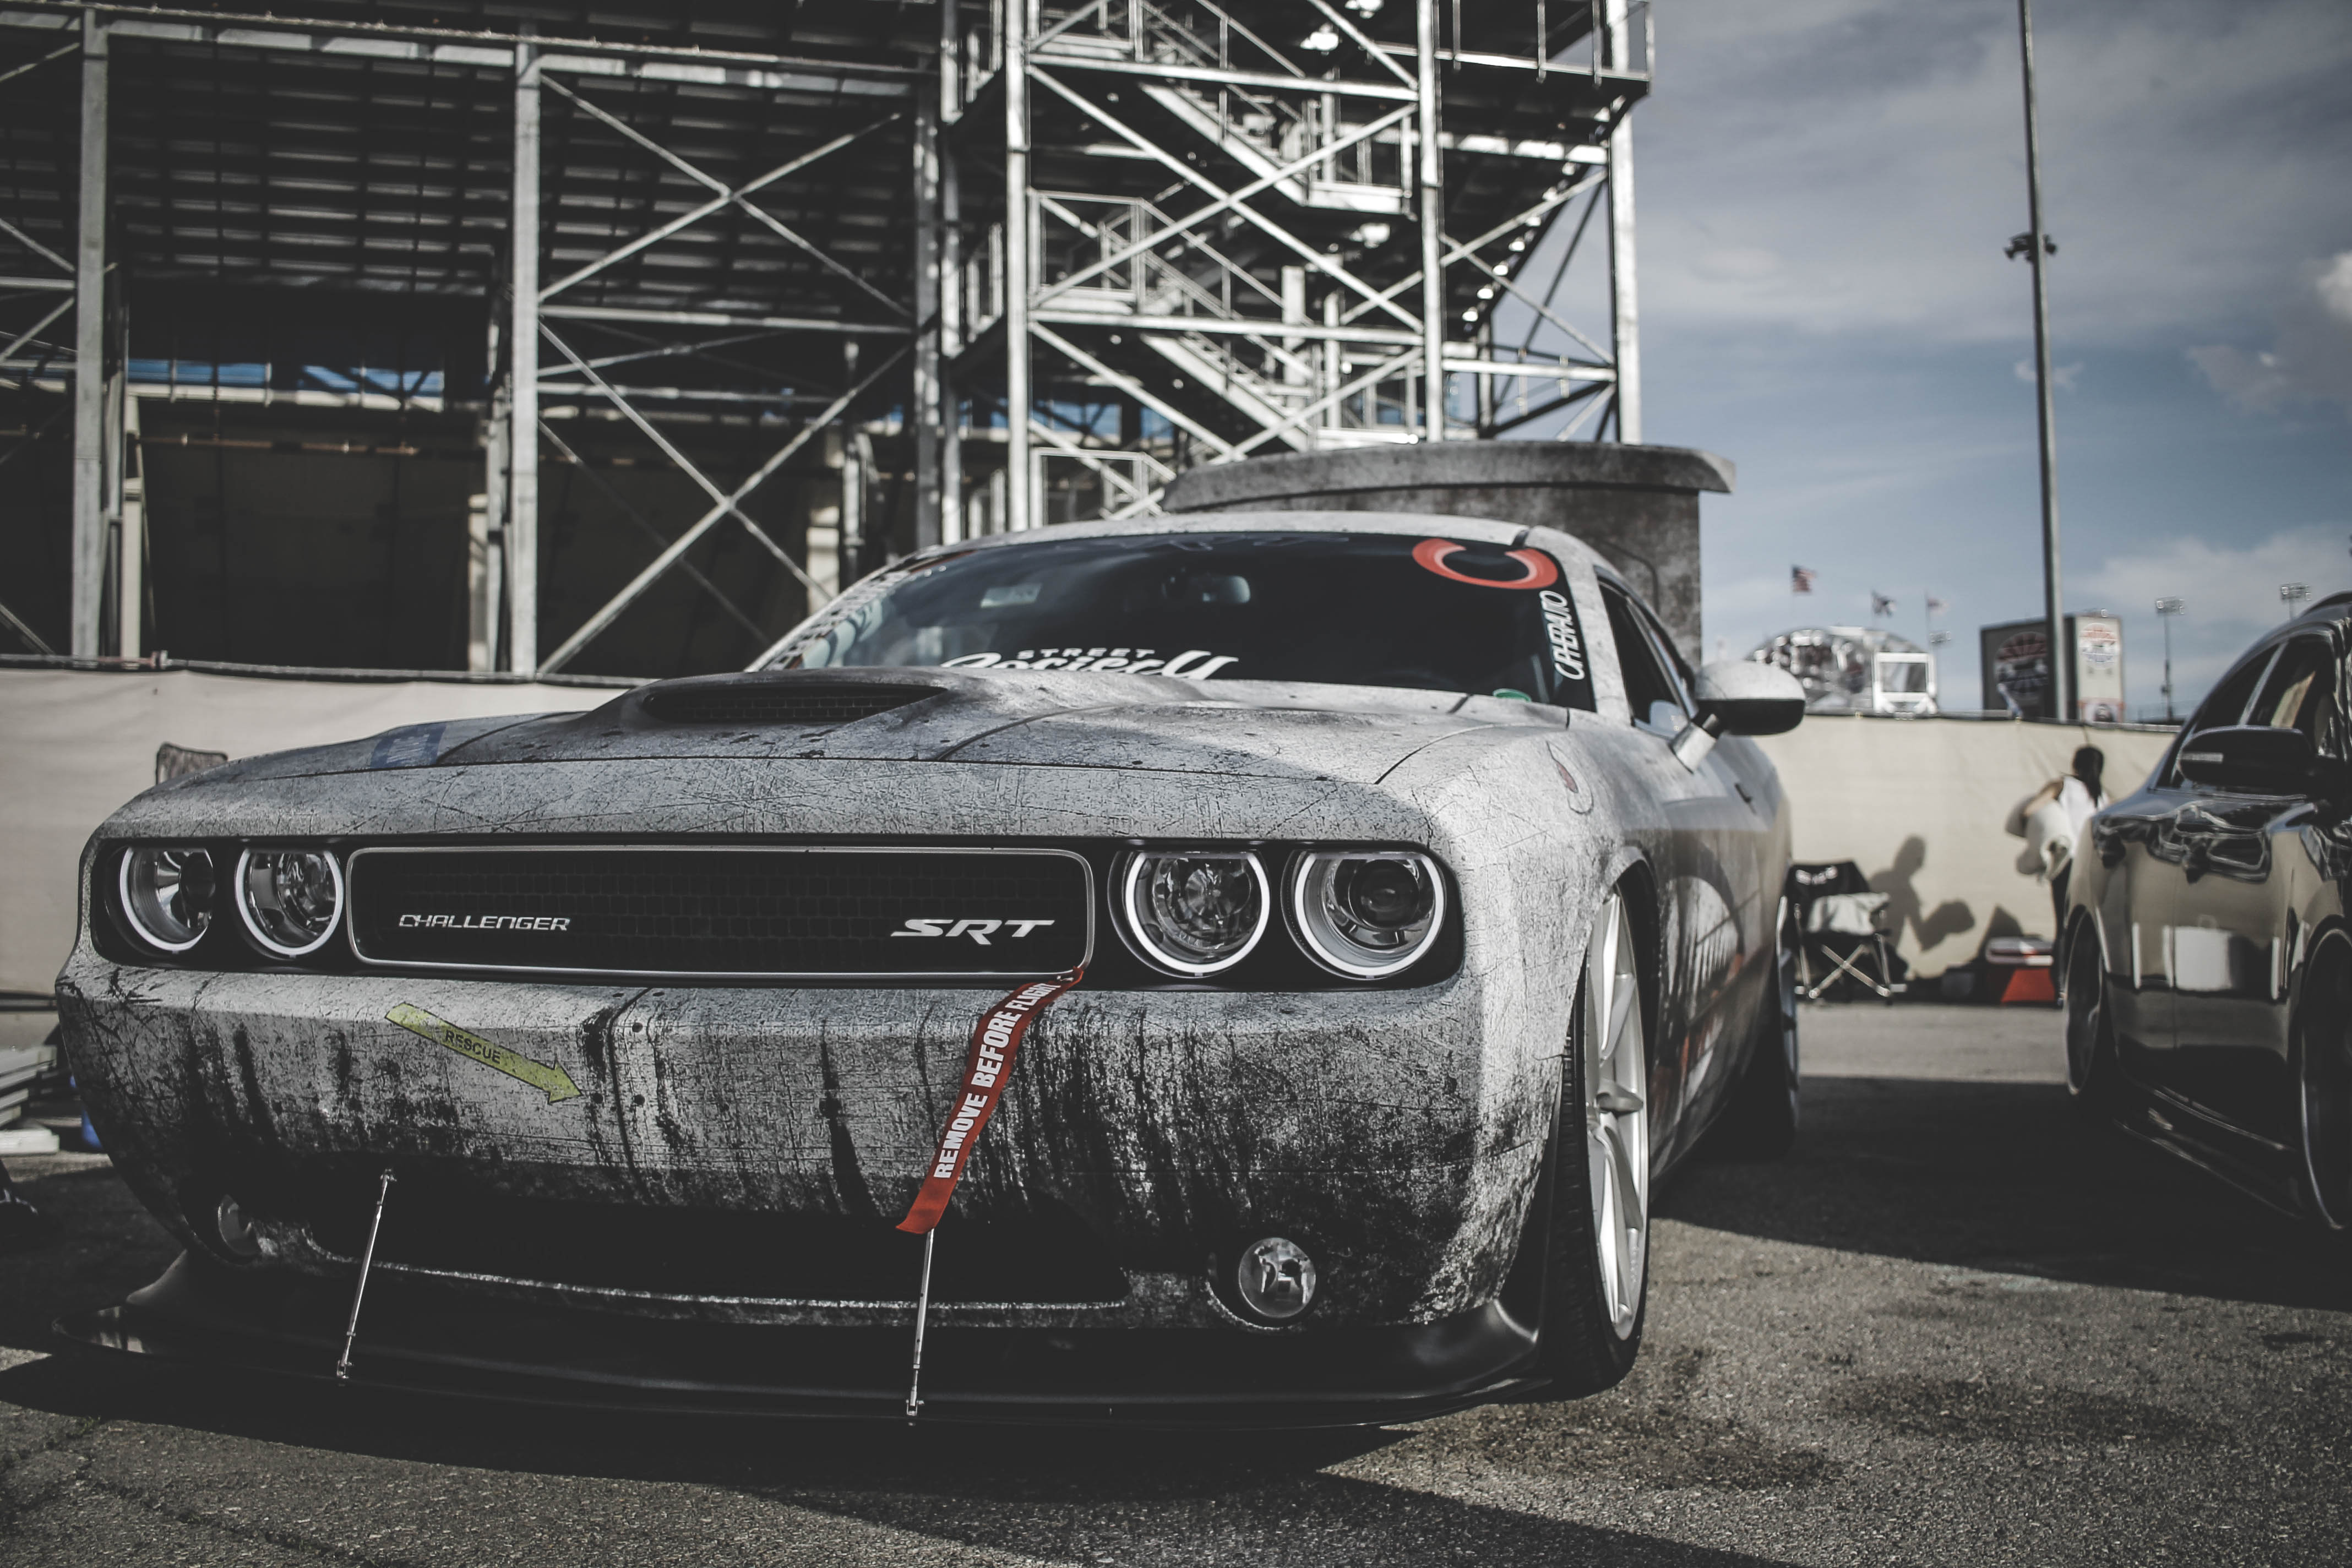 64434 download wallpaper races, dodge challenger, sports, cars, sports car, dodge, challenger screensavers and pictures for free